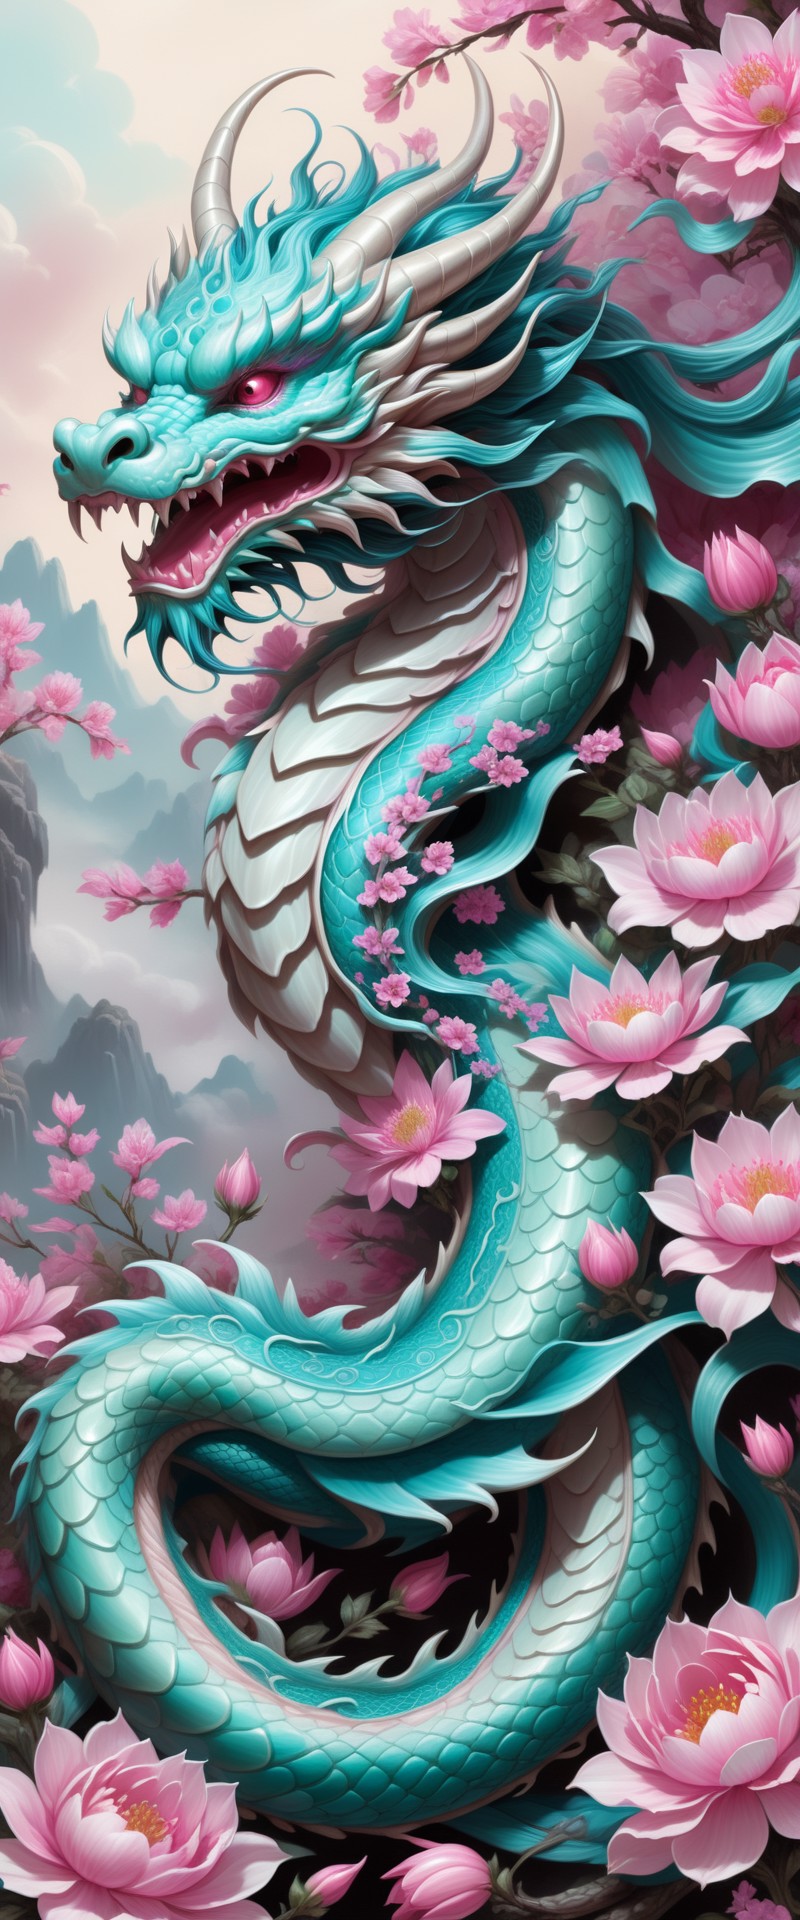 illustration of a cyan chinese dragon surrounded by pink flowers, the dragon has a long body akin to a snake, his long bod...